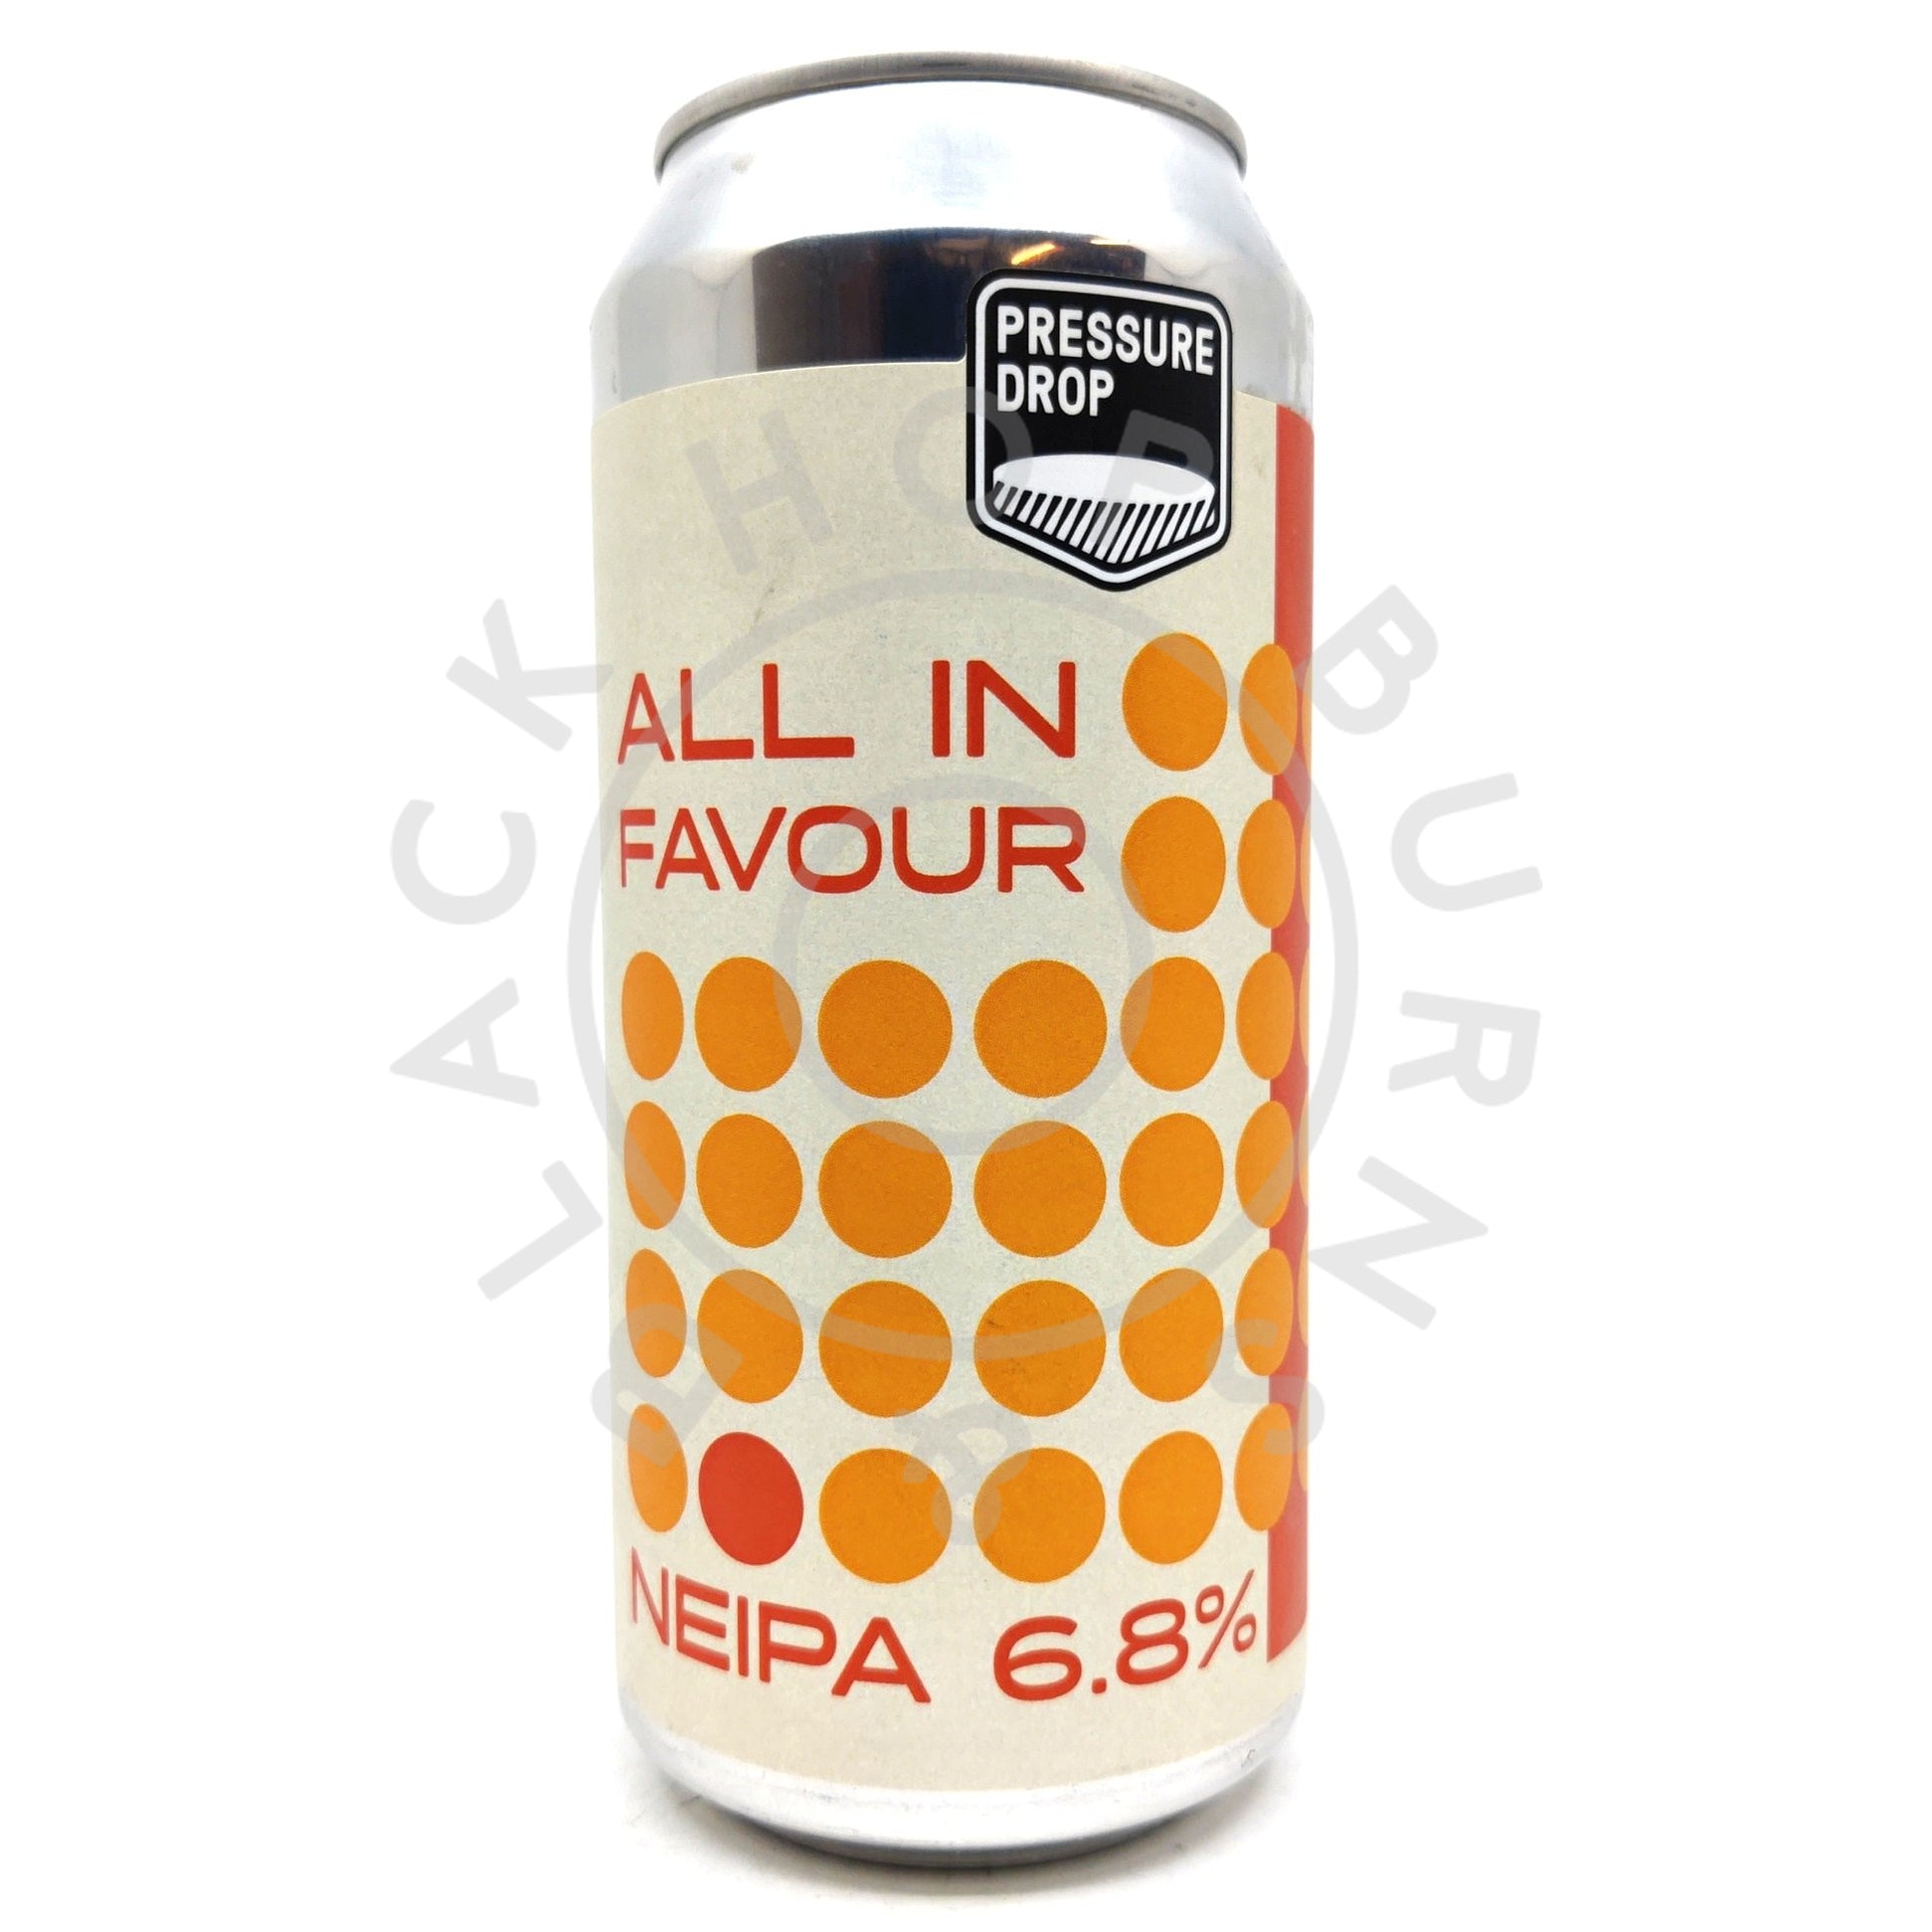 Pressure Drop All In Favour New England IPA 6.8% (440ml can)-Hop Burns & Black